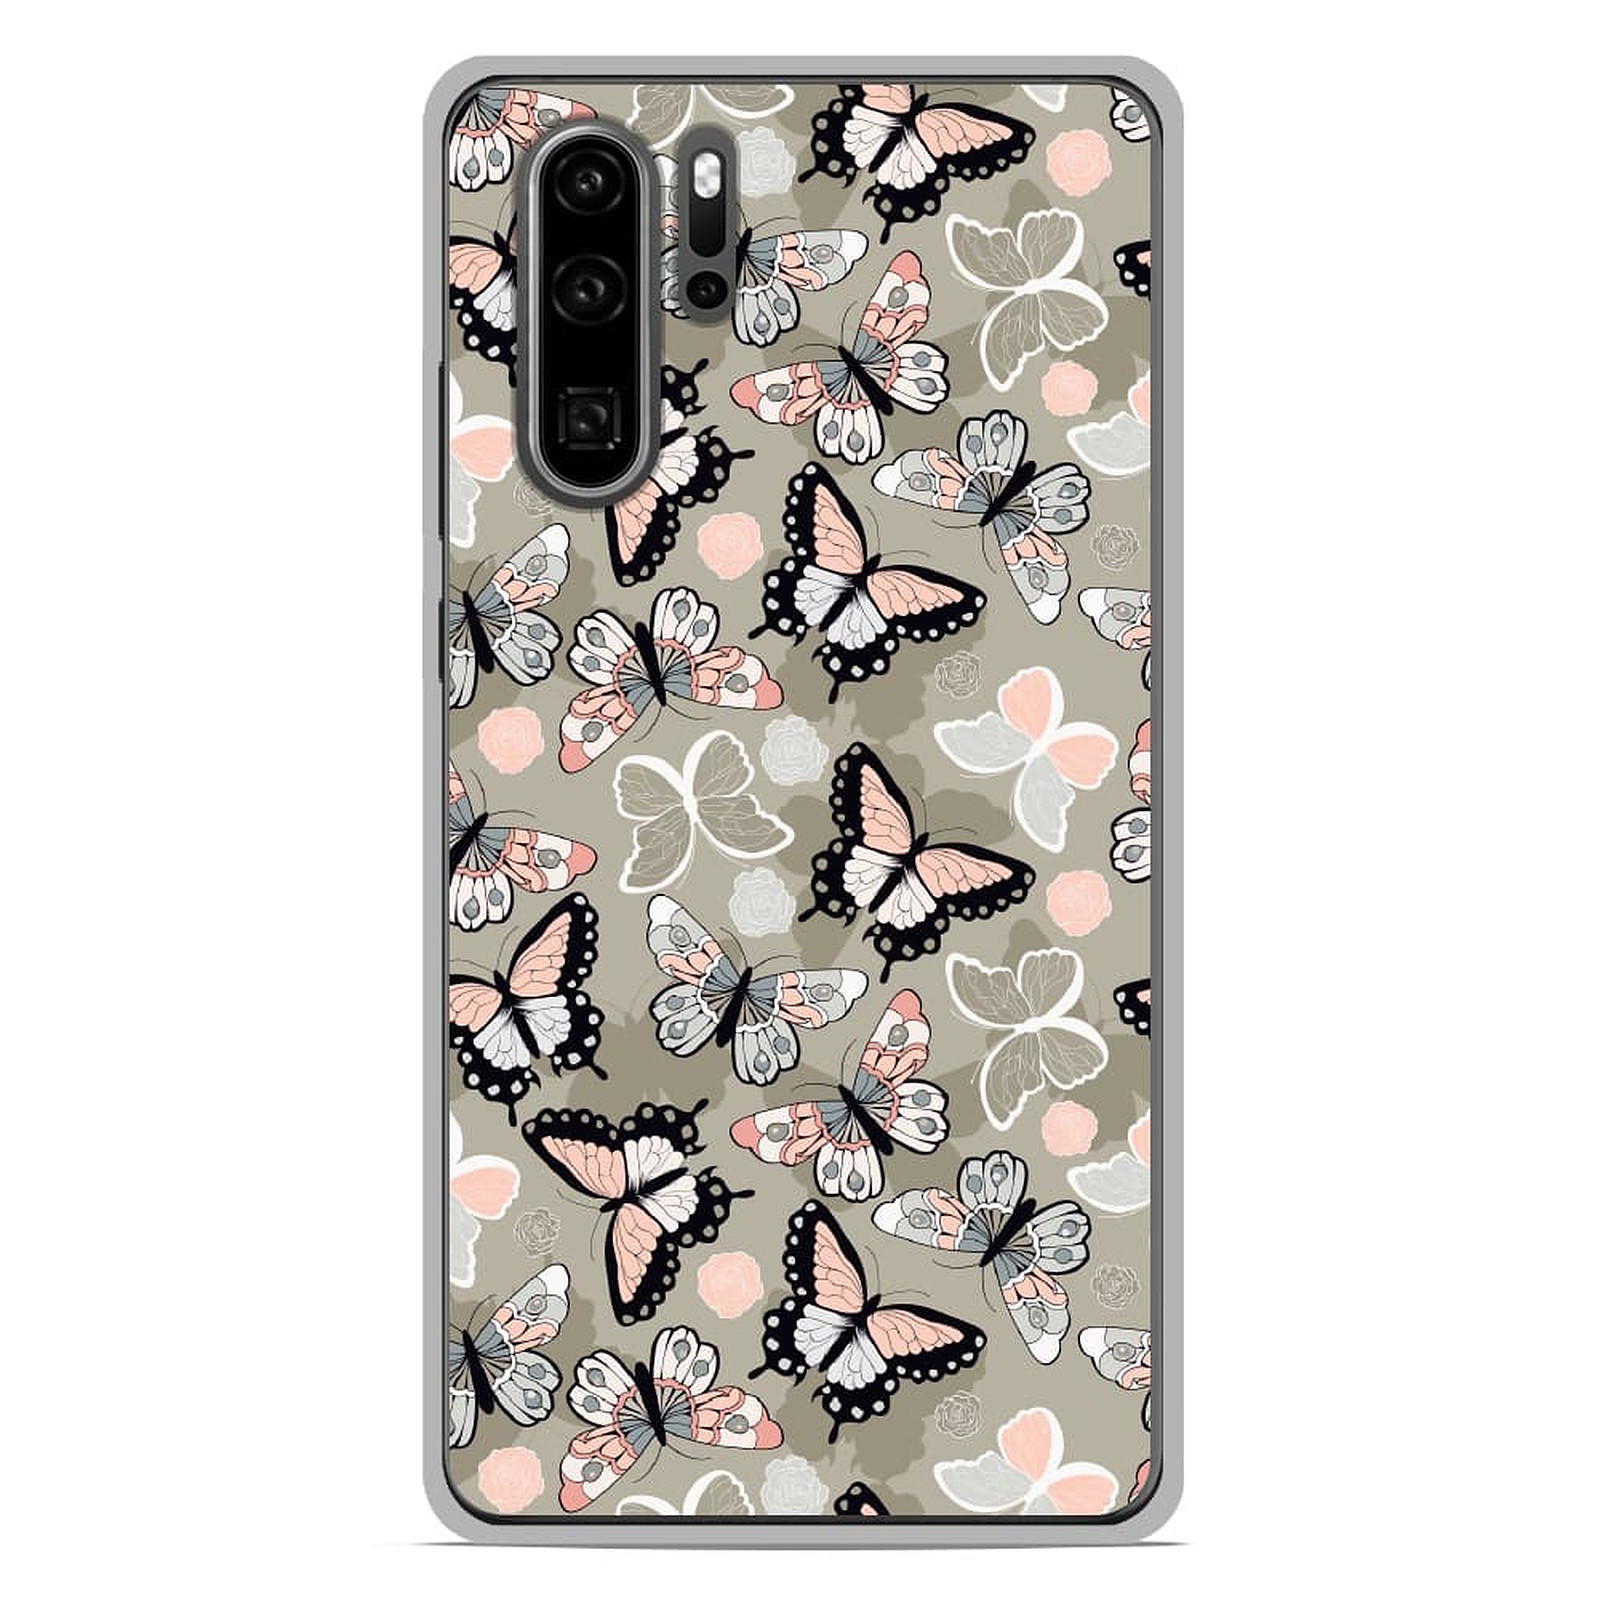 1001 Coques Coque silicone gel Huawei P30 Pro motif Papillons Vintage - Coque telephone 1001Coques